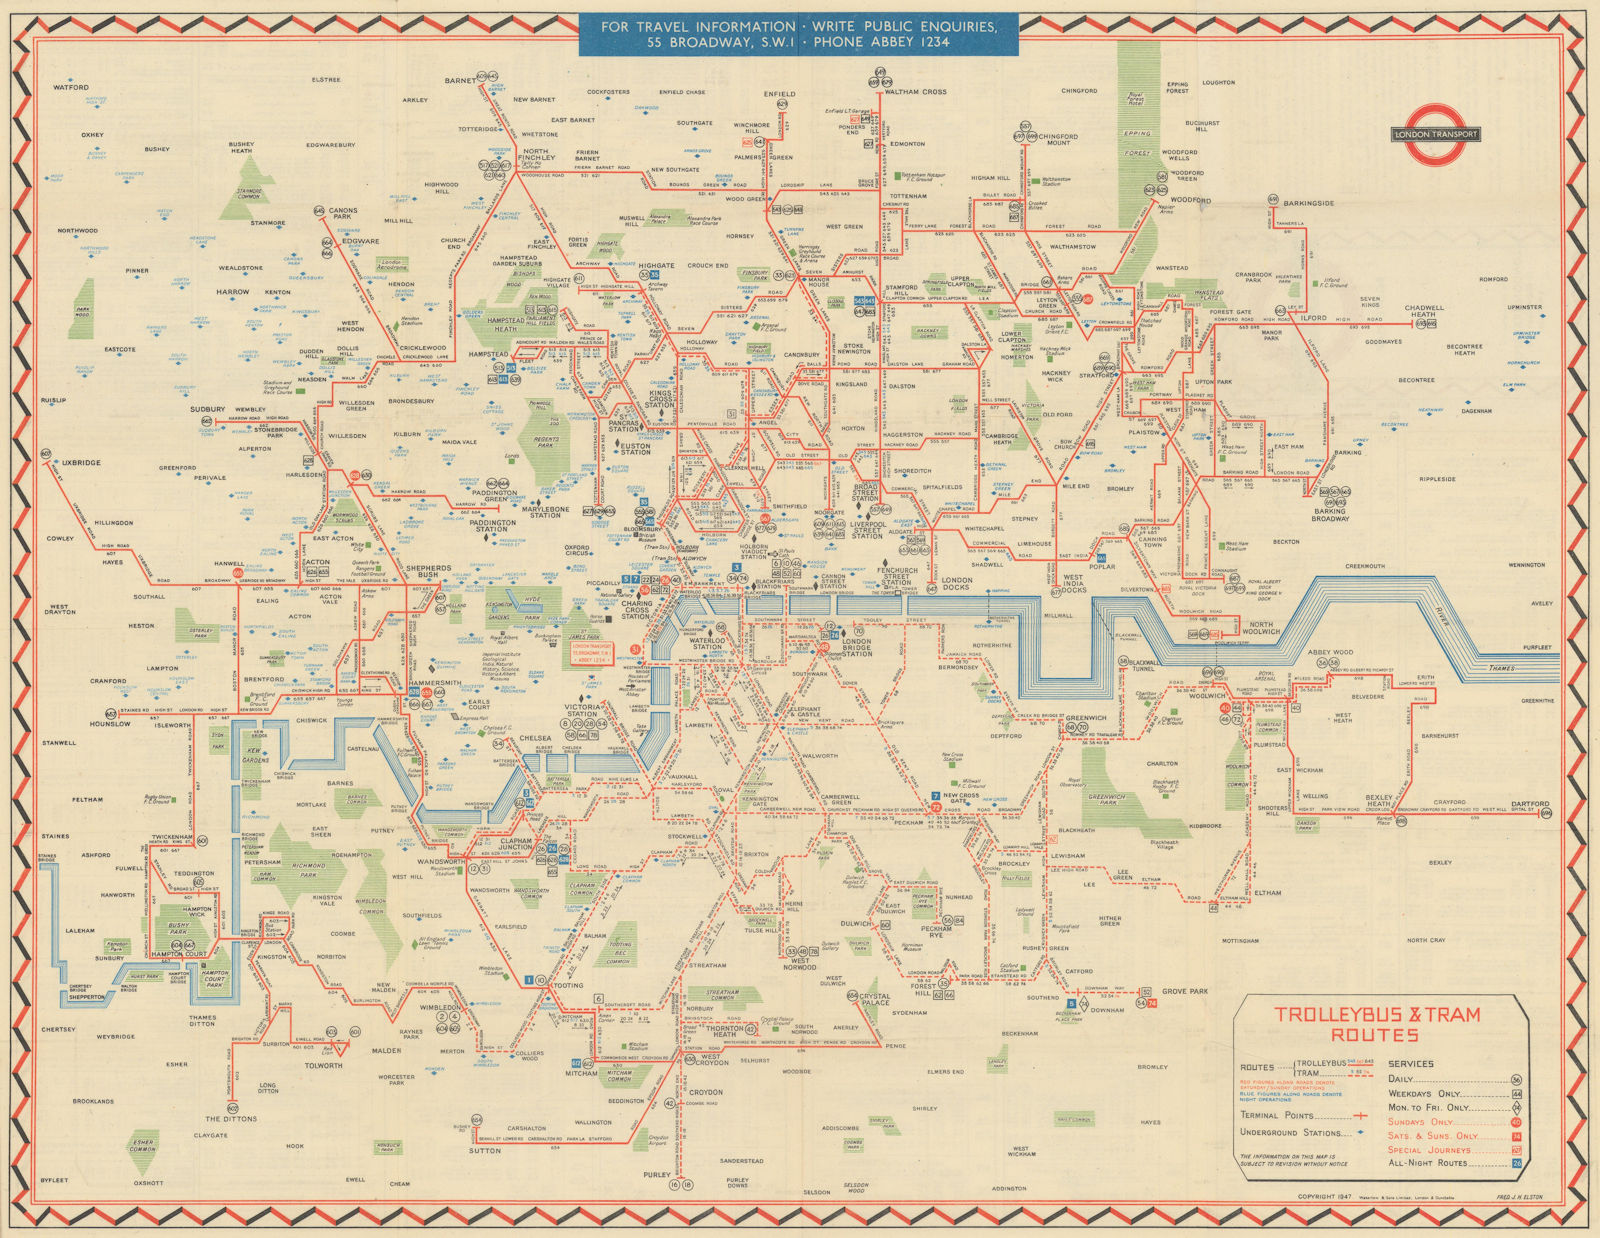 London Transport Trolleybus & Tram route map. ELSTON. May 1949 old vintage